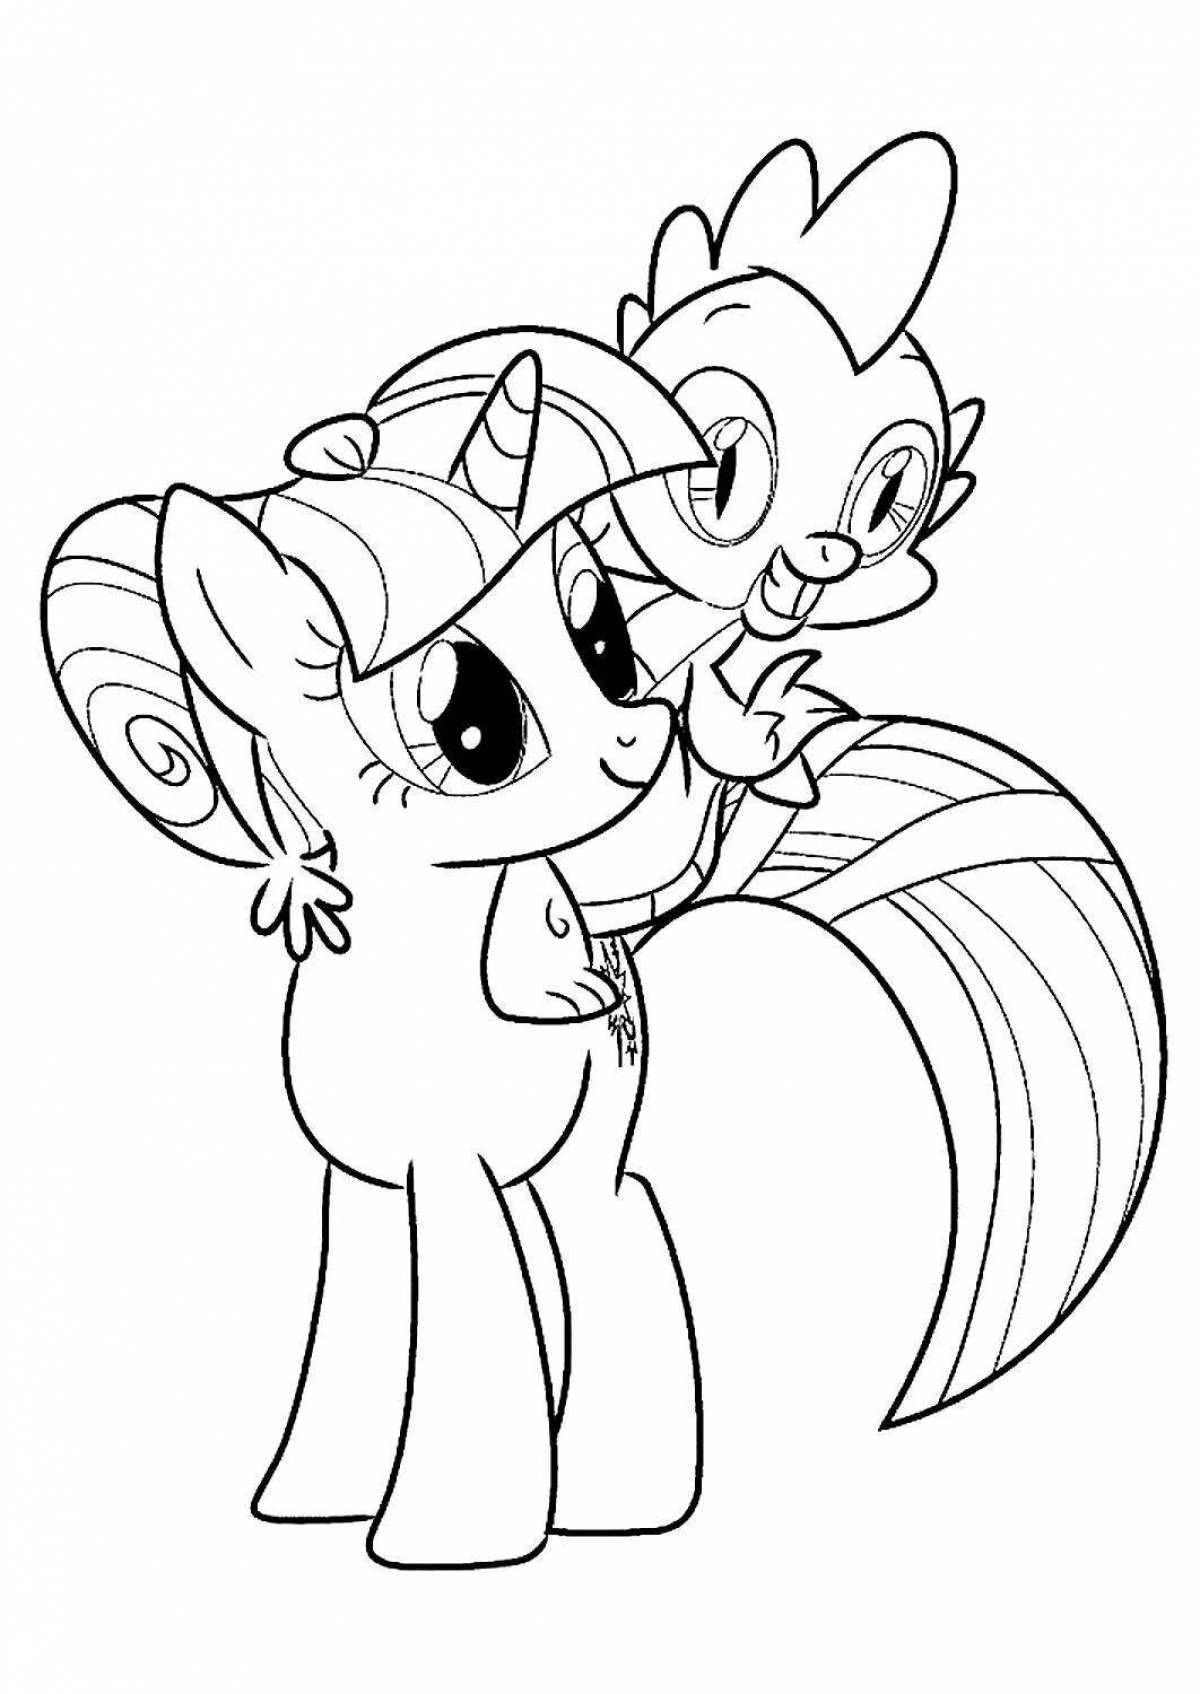 Vibrant pony print coloring page